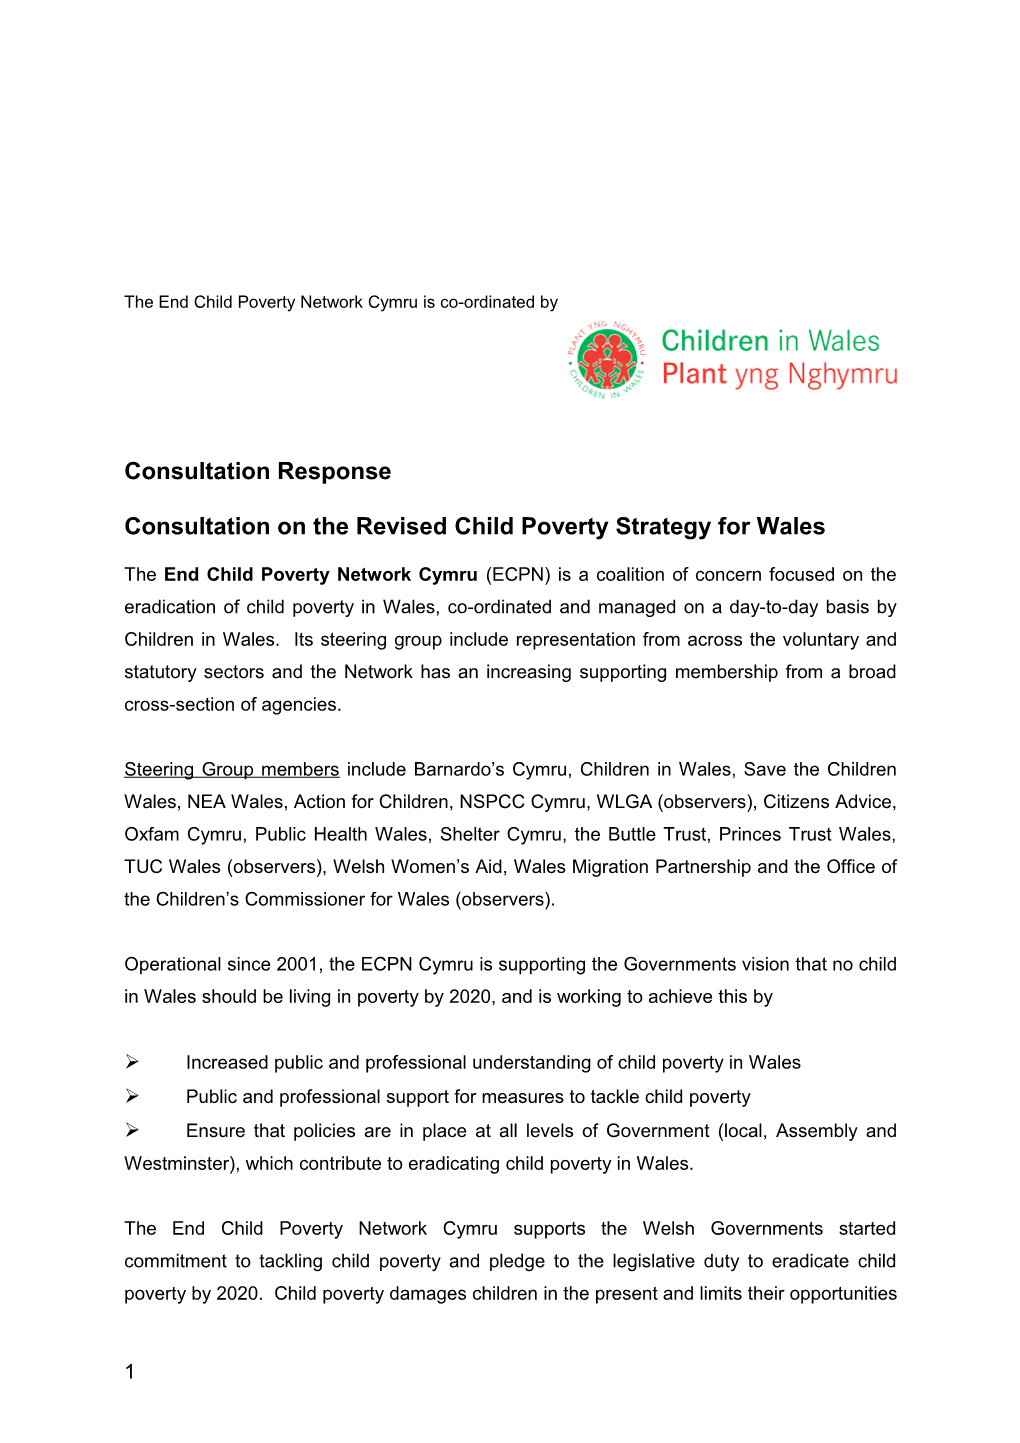 Consultation on the Revised Child Poverty Strategy for Wales